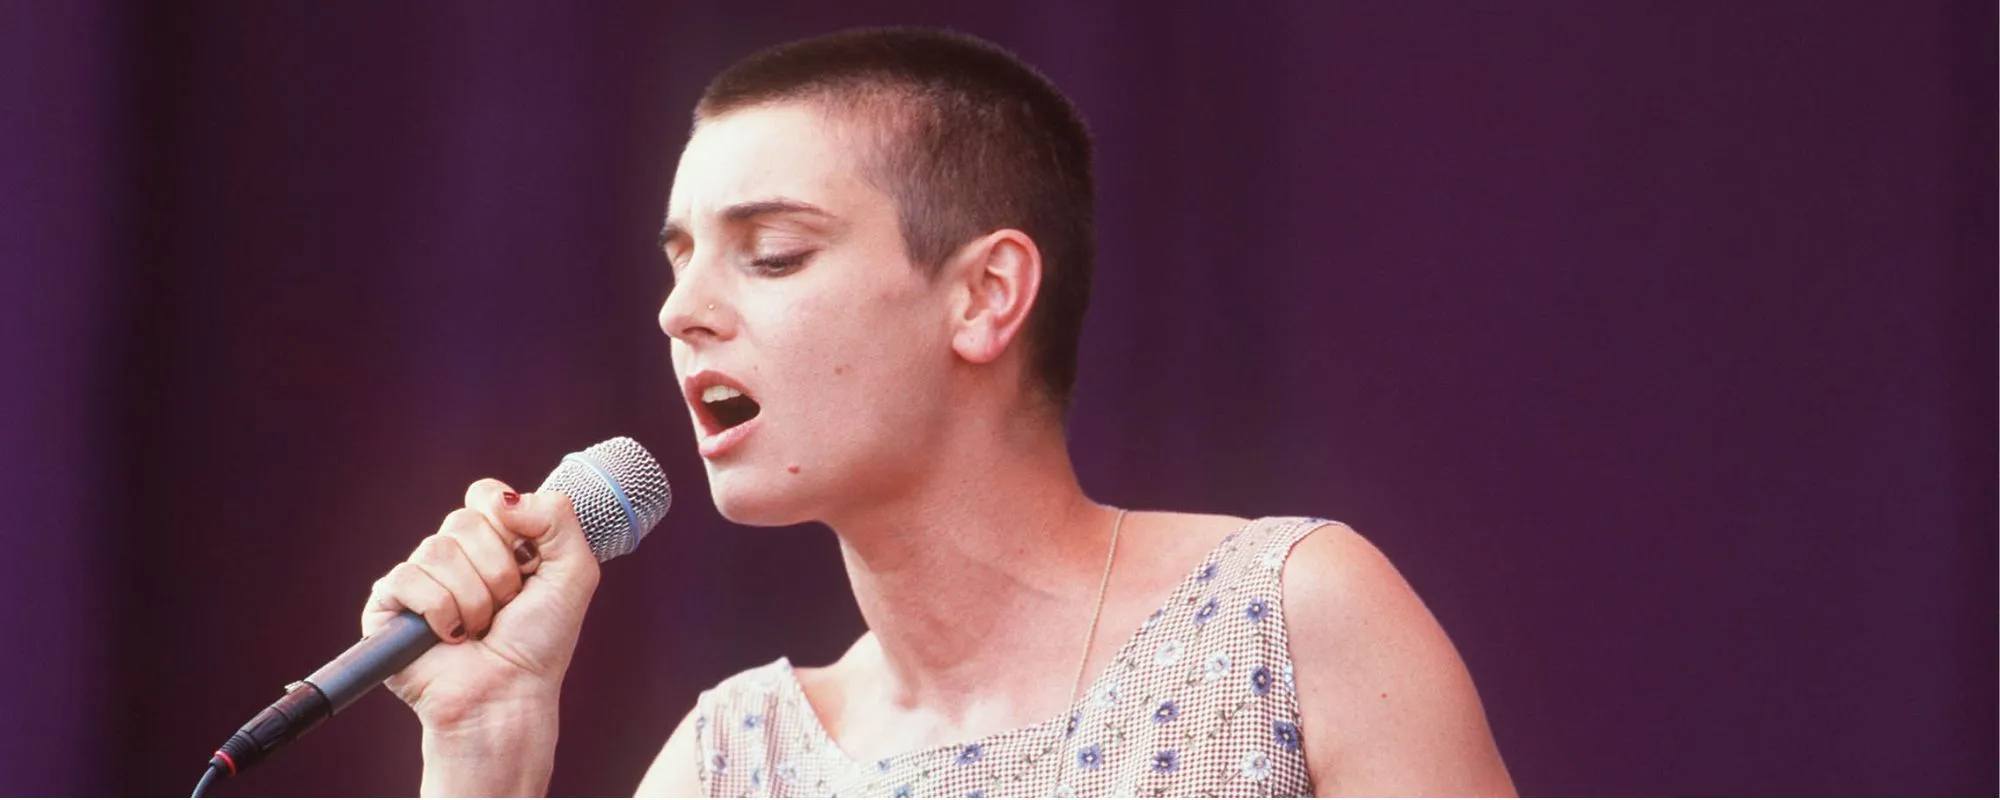 The Story Behind the Other Prince Song  Sinéad O’Connor Covered